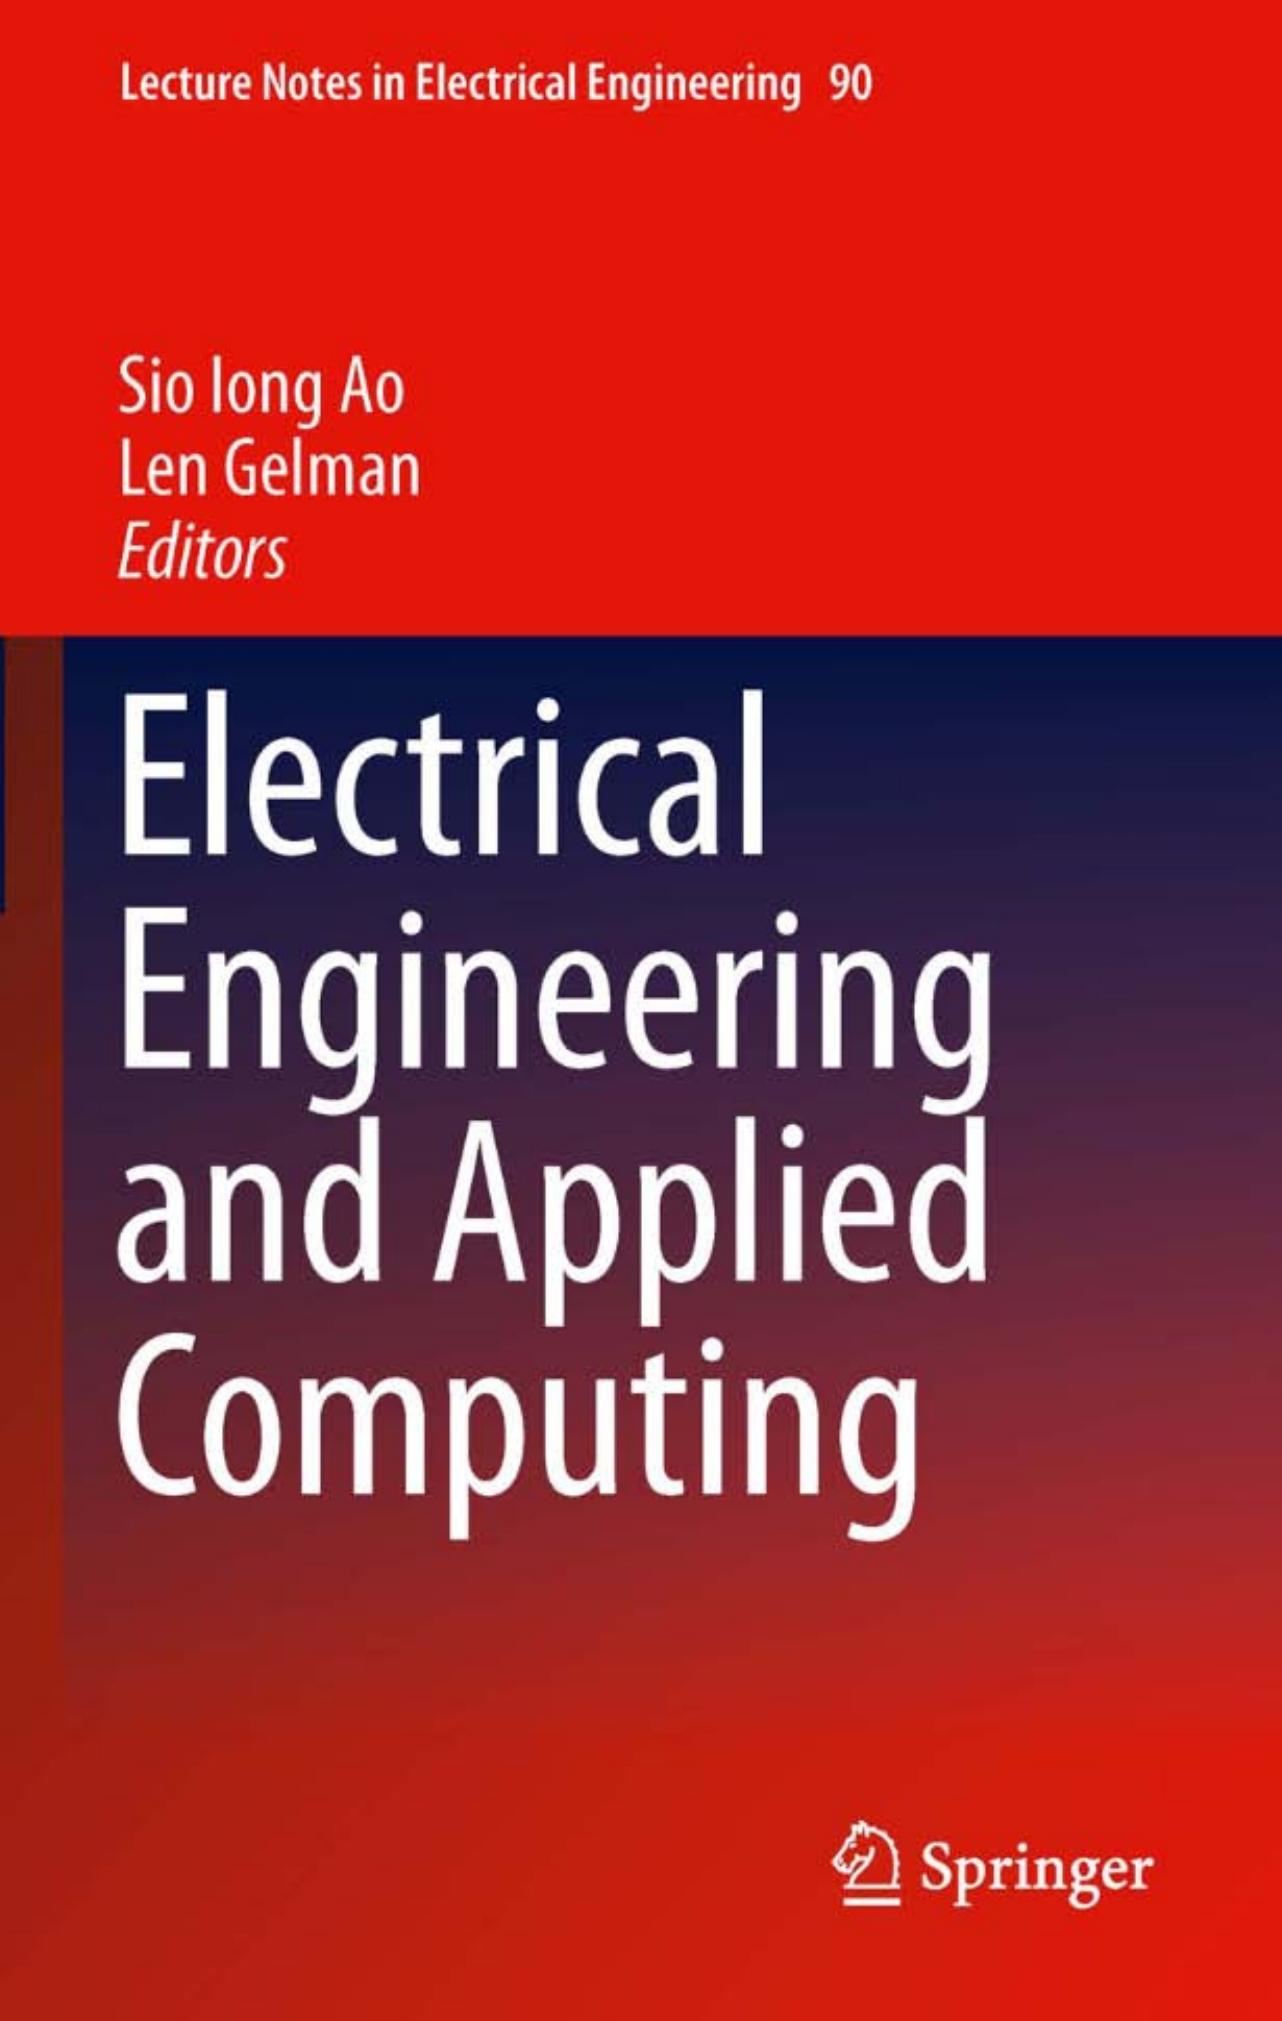 Electrical Engineering and Applied Computing (Lecture Notes in Electrical Engineering, 90)